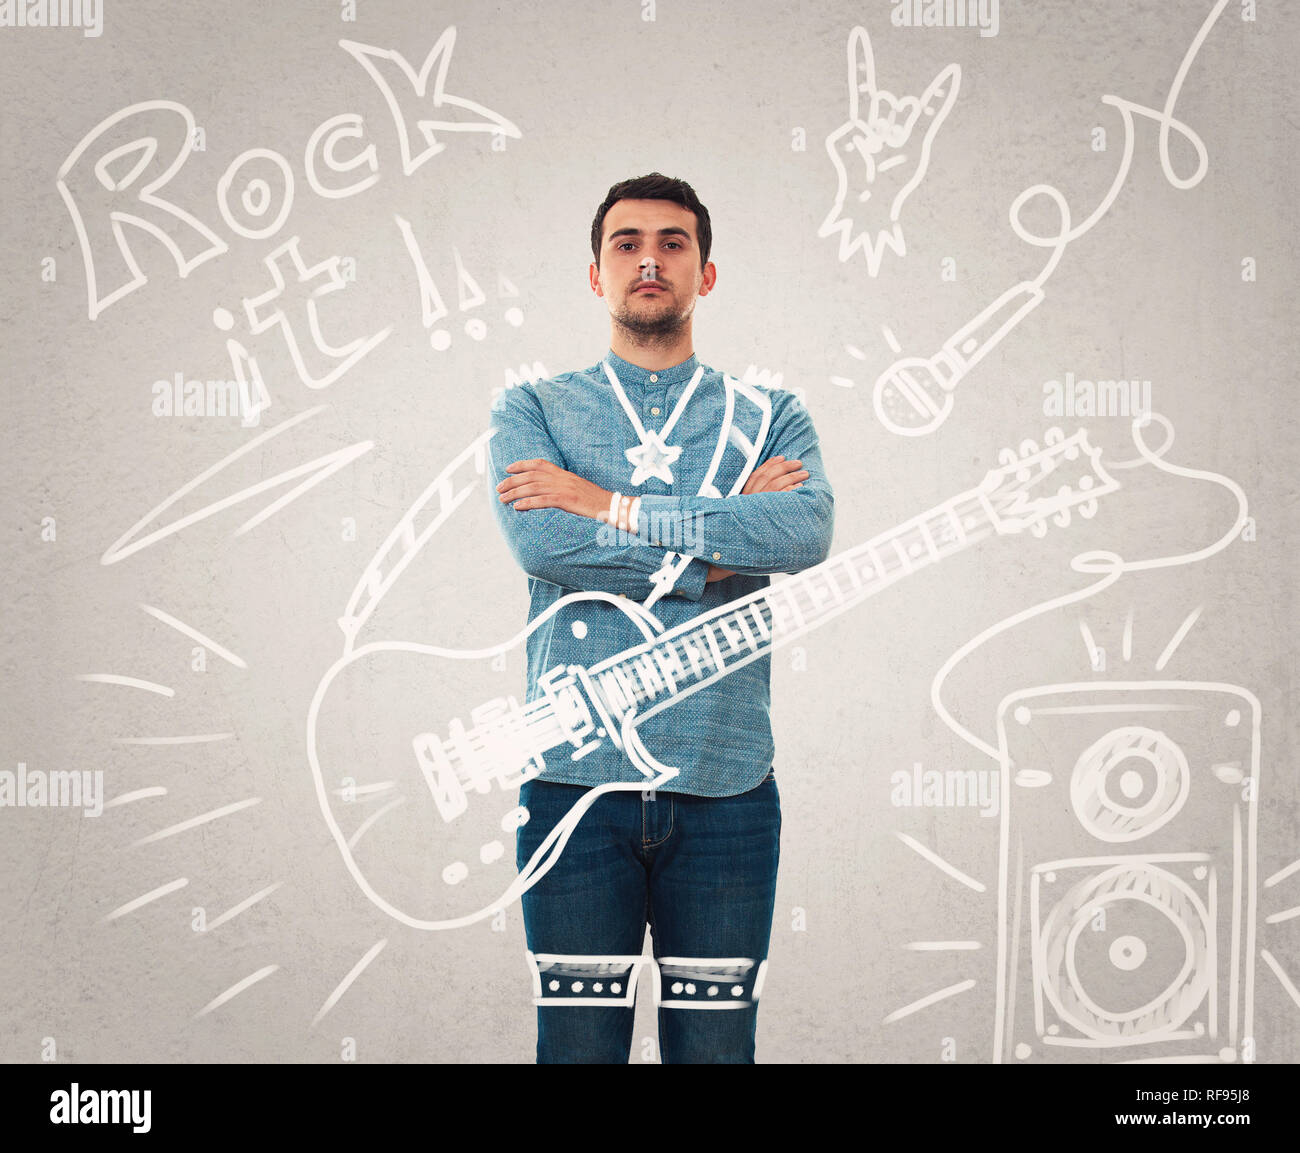 Confident young man arms crossed imagine him as a musician with a guitar performing on stage. Dream come true as sketches on the background. Rock star Stock Photo